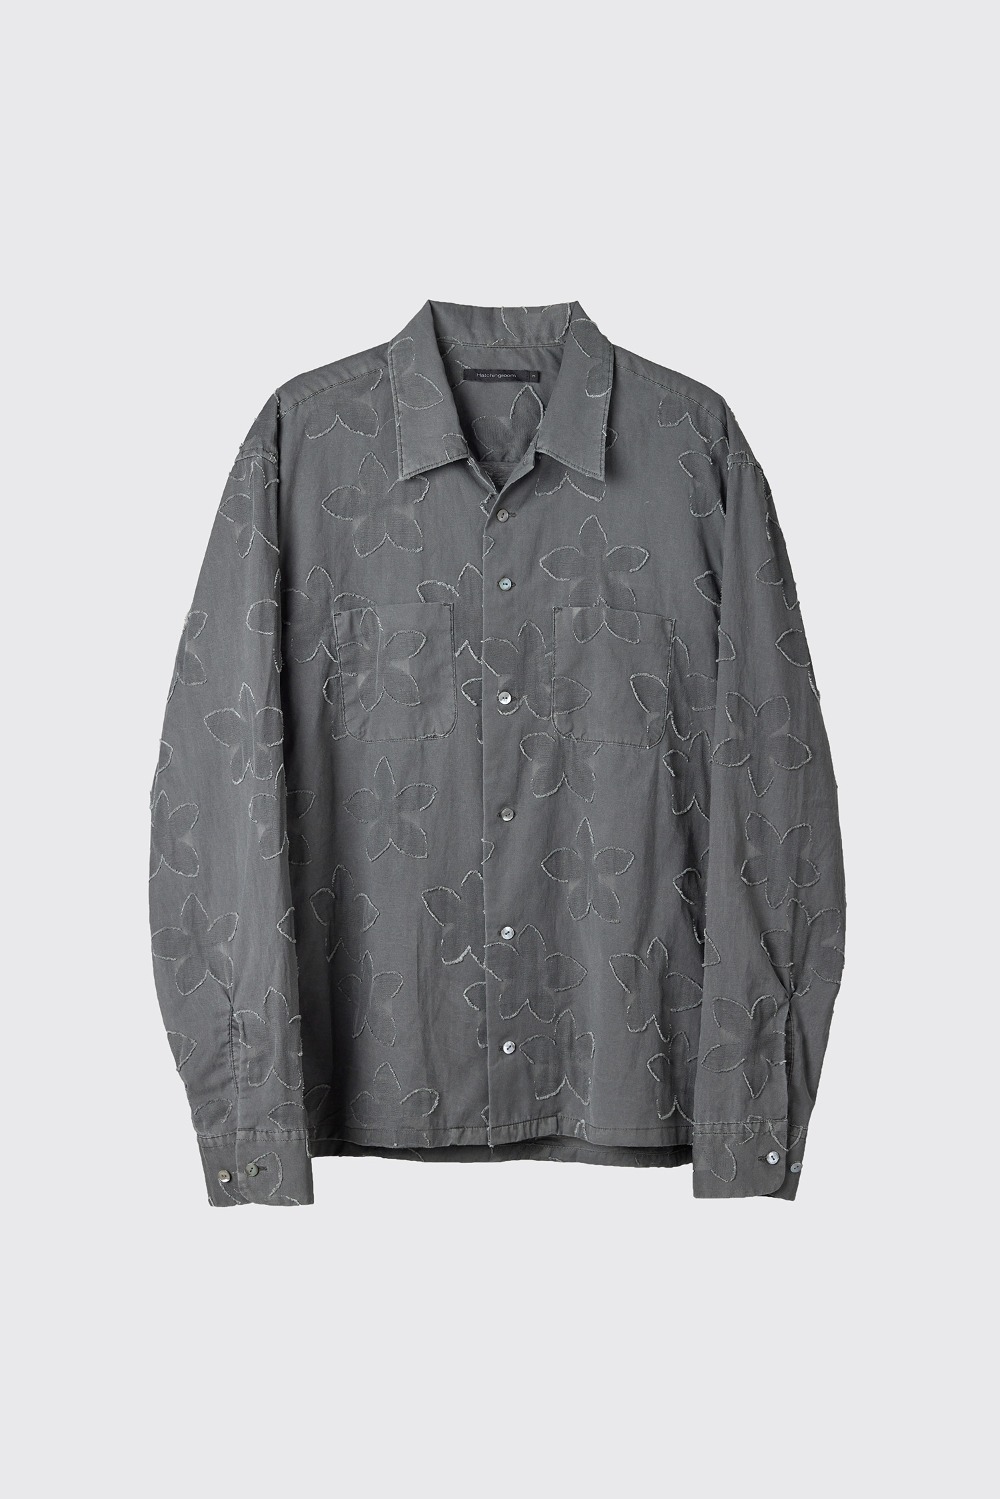 Trucker Shirt Pigment Dyed Floral Jacquard Charcoal